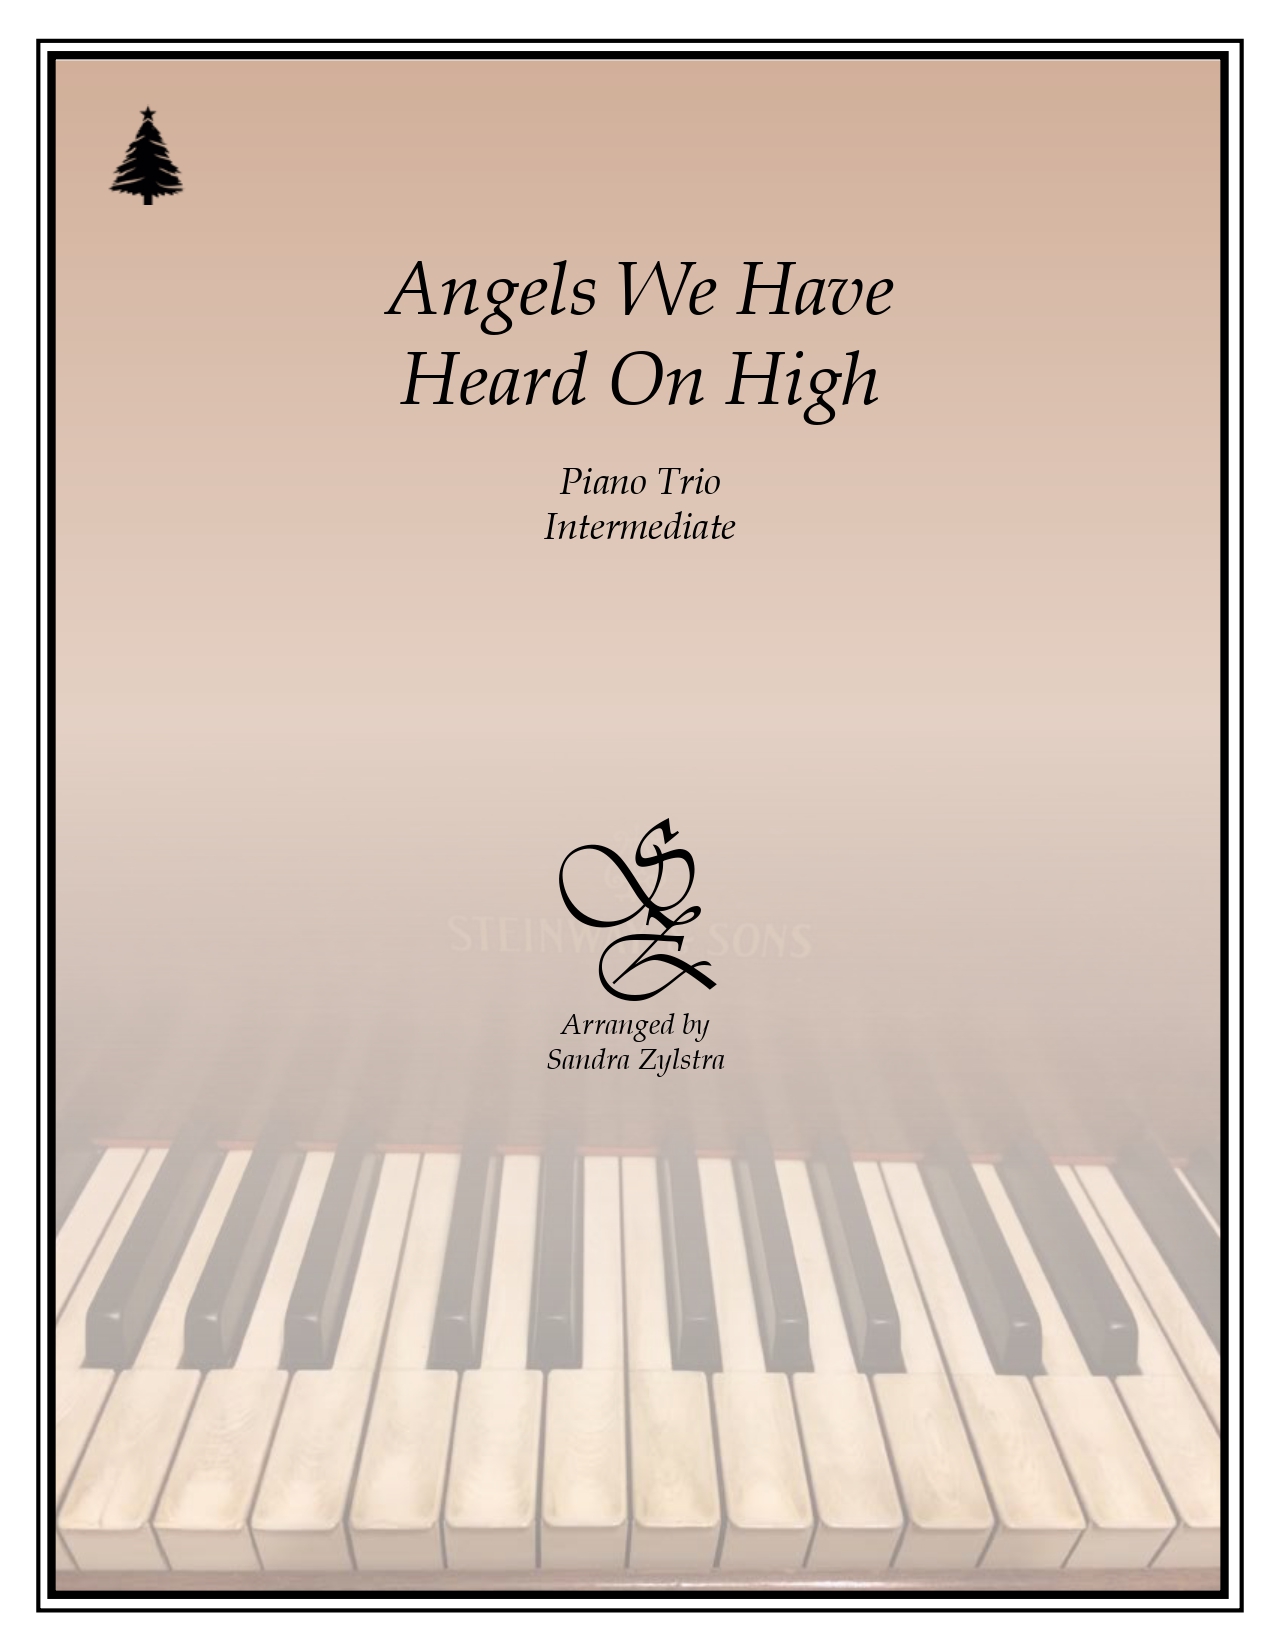 Angels We Have Heard On High piano trio cover page 00011